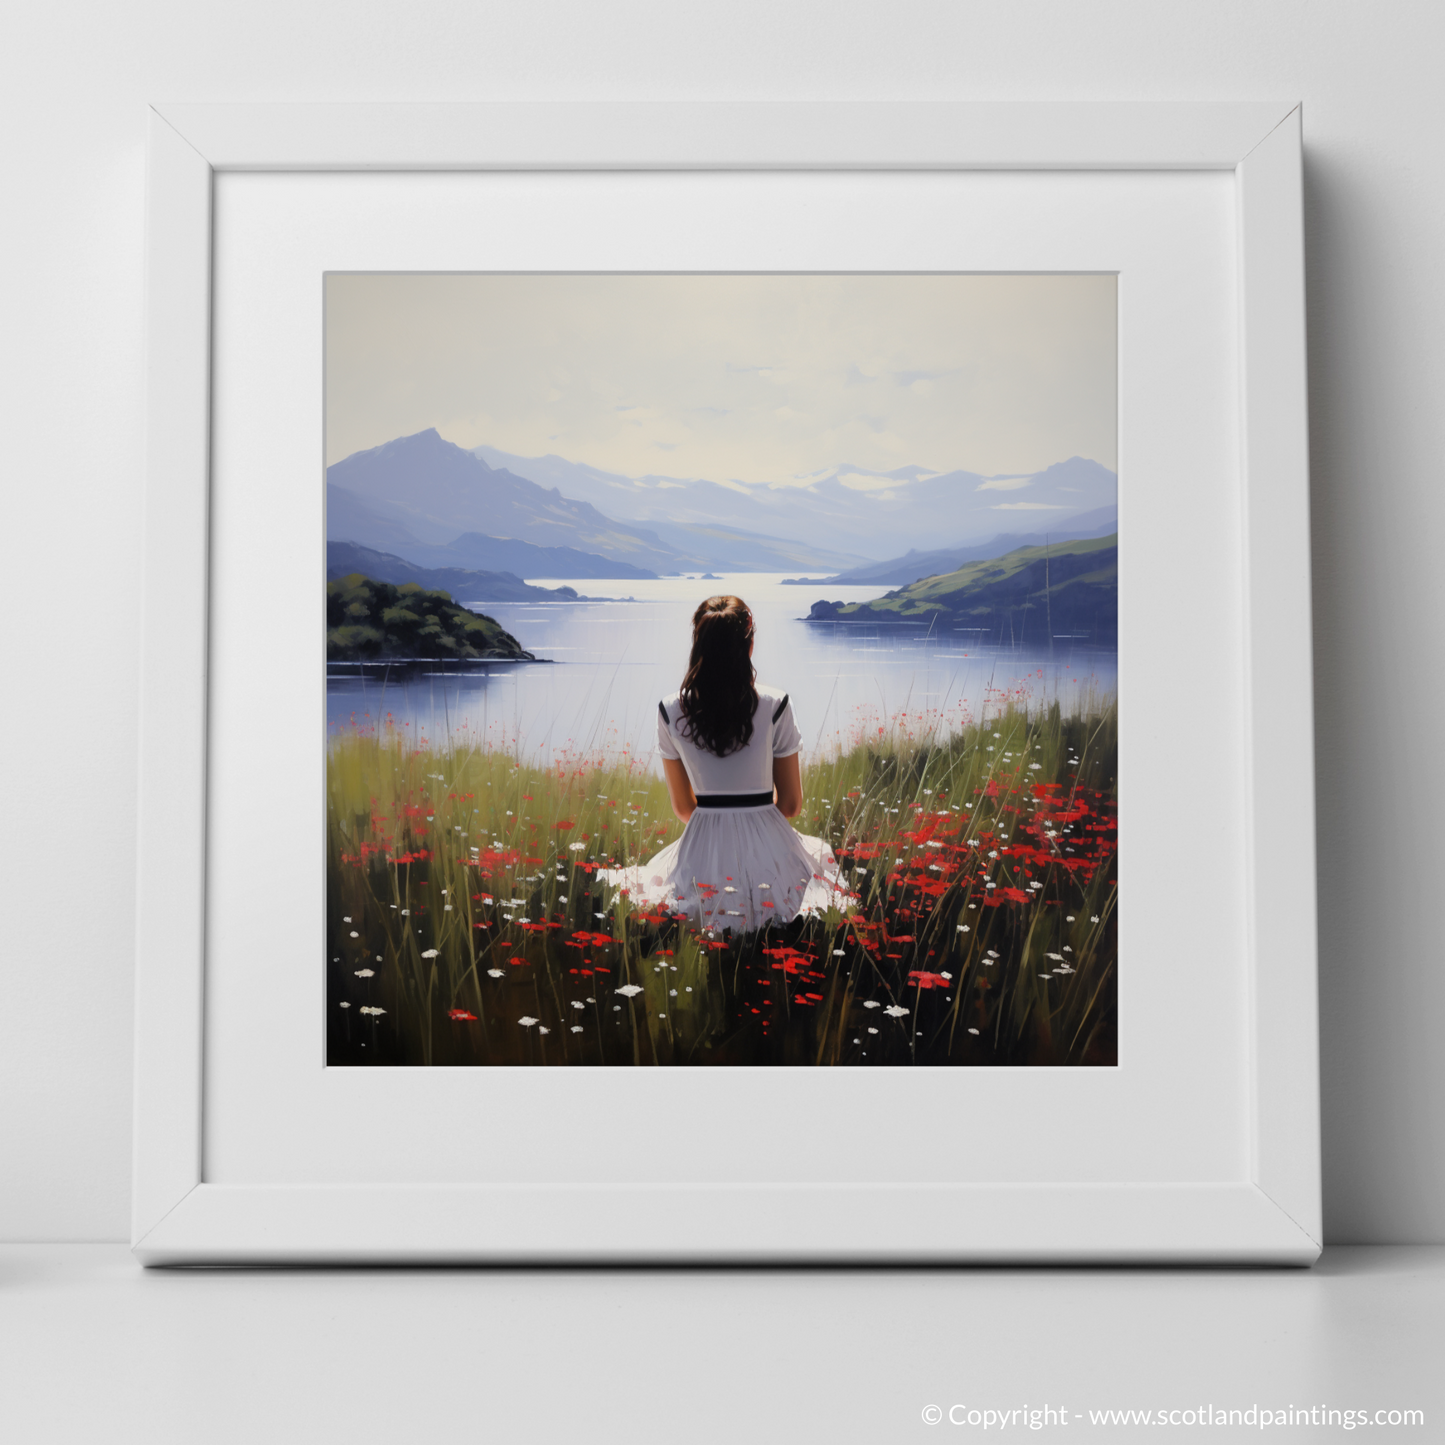 Art Print of Wildflowers by Loch Lomond with a white frame